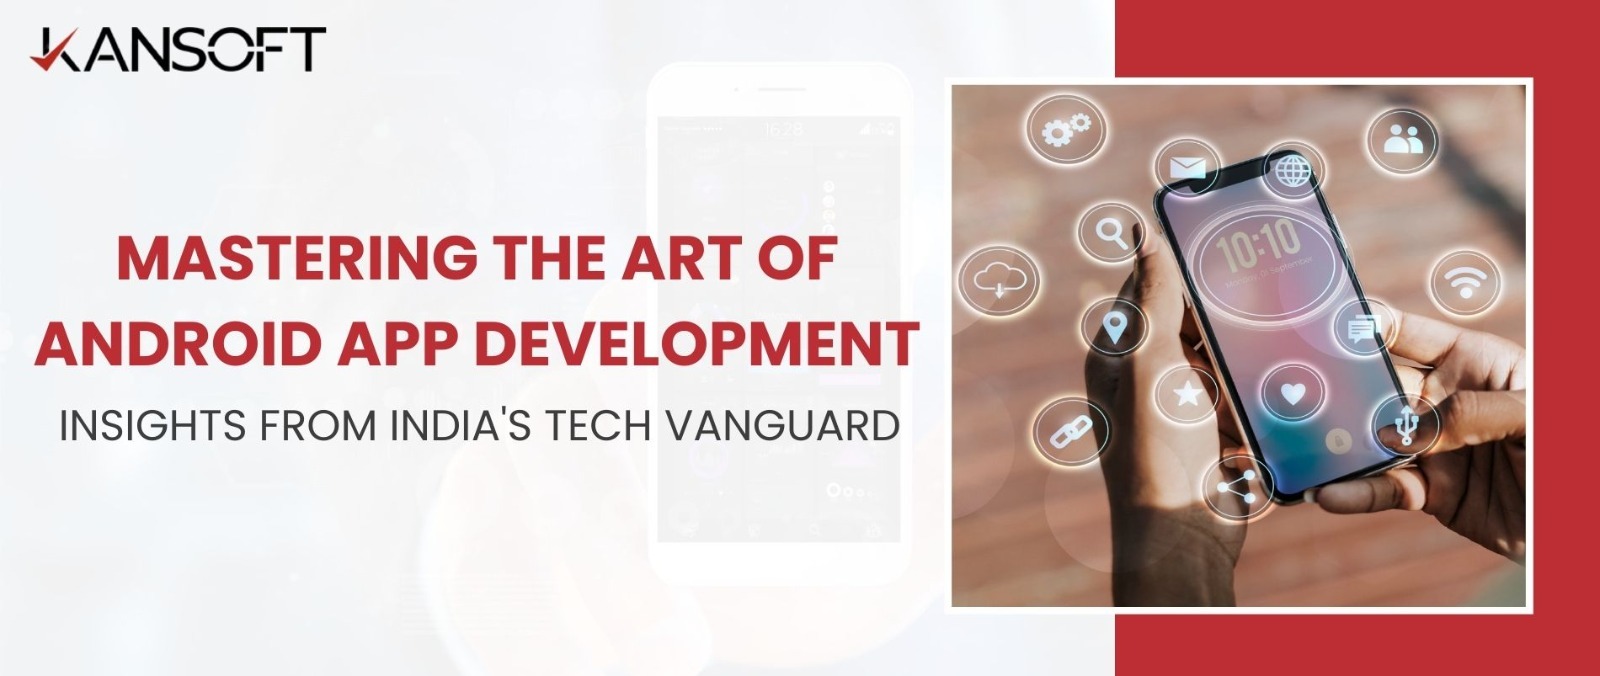 Mastering the Art of Android App Development: Insights from India’s Tech Vanguard